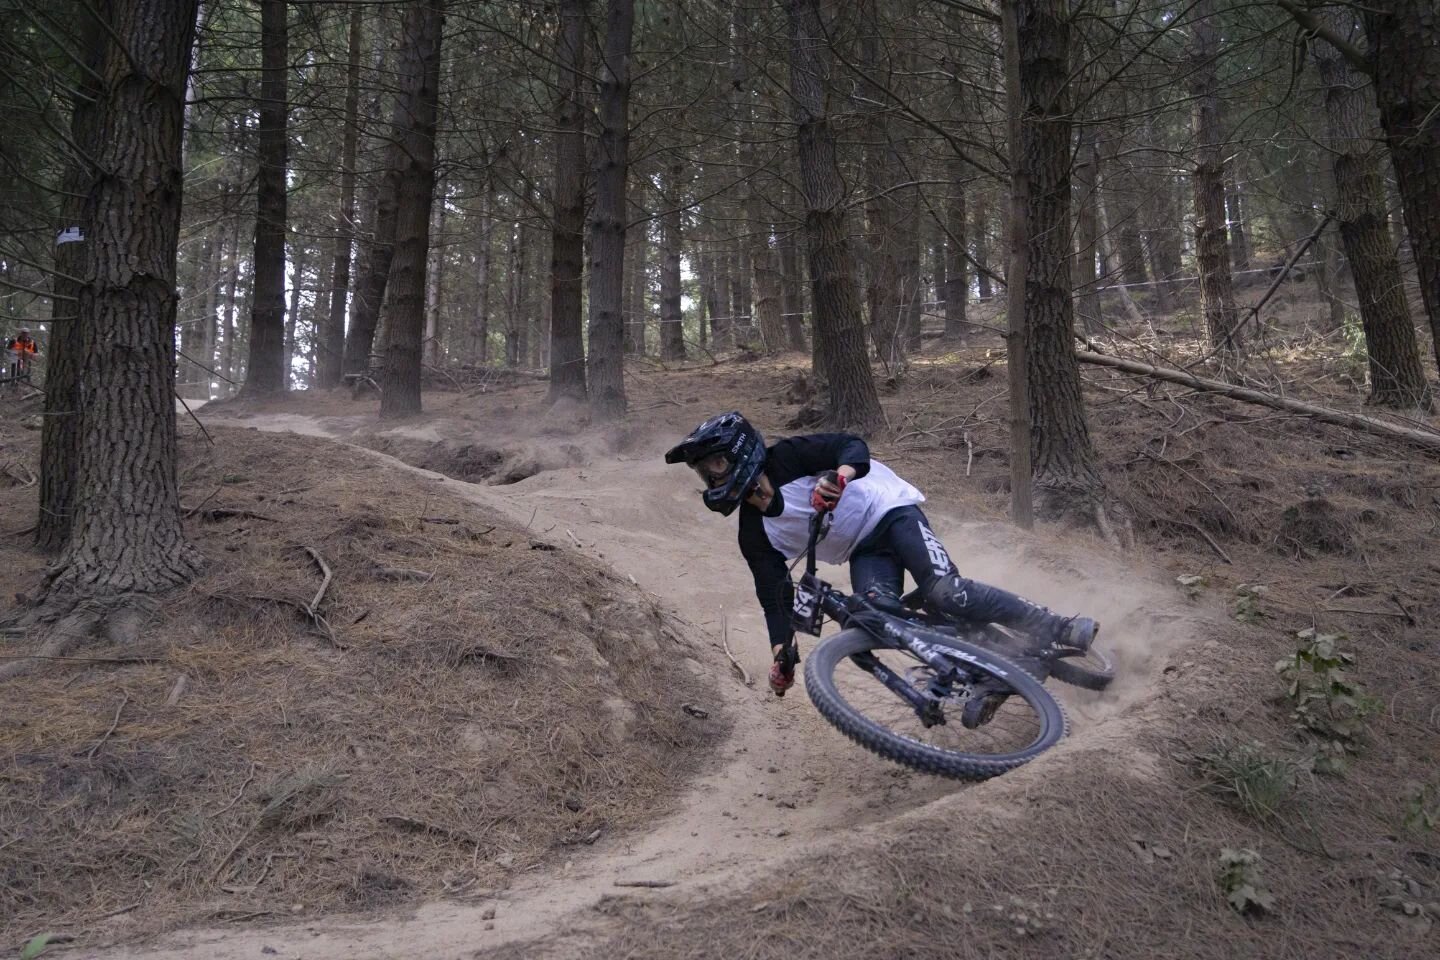 Who's doing the DH this weekend?

Team Dirtside rider Joel showing us all how to corner 👊.

📷 @twentysix_frames

#teamdirtside
#dirtside
#fistbump
#fistbumpsforever 
#downhill
#downhillmtb
#mtb
#mtblife
#lifebehindbars
#gripstotheground